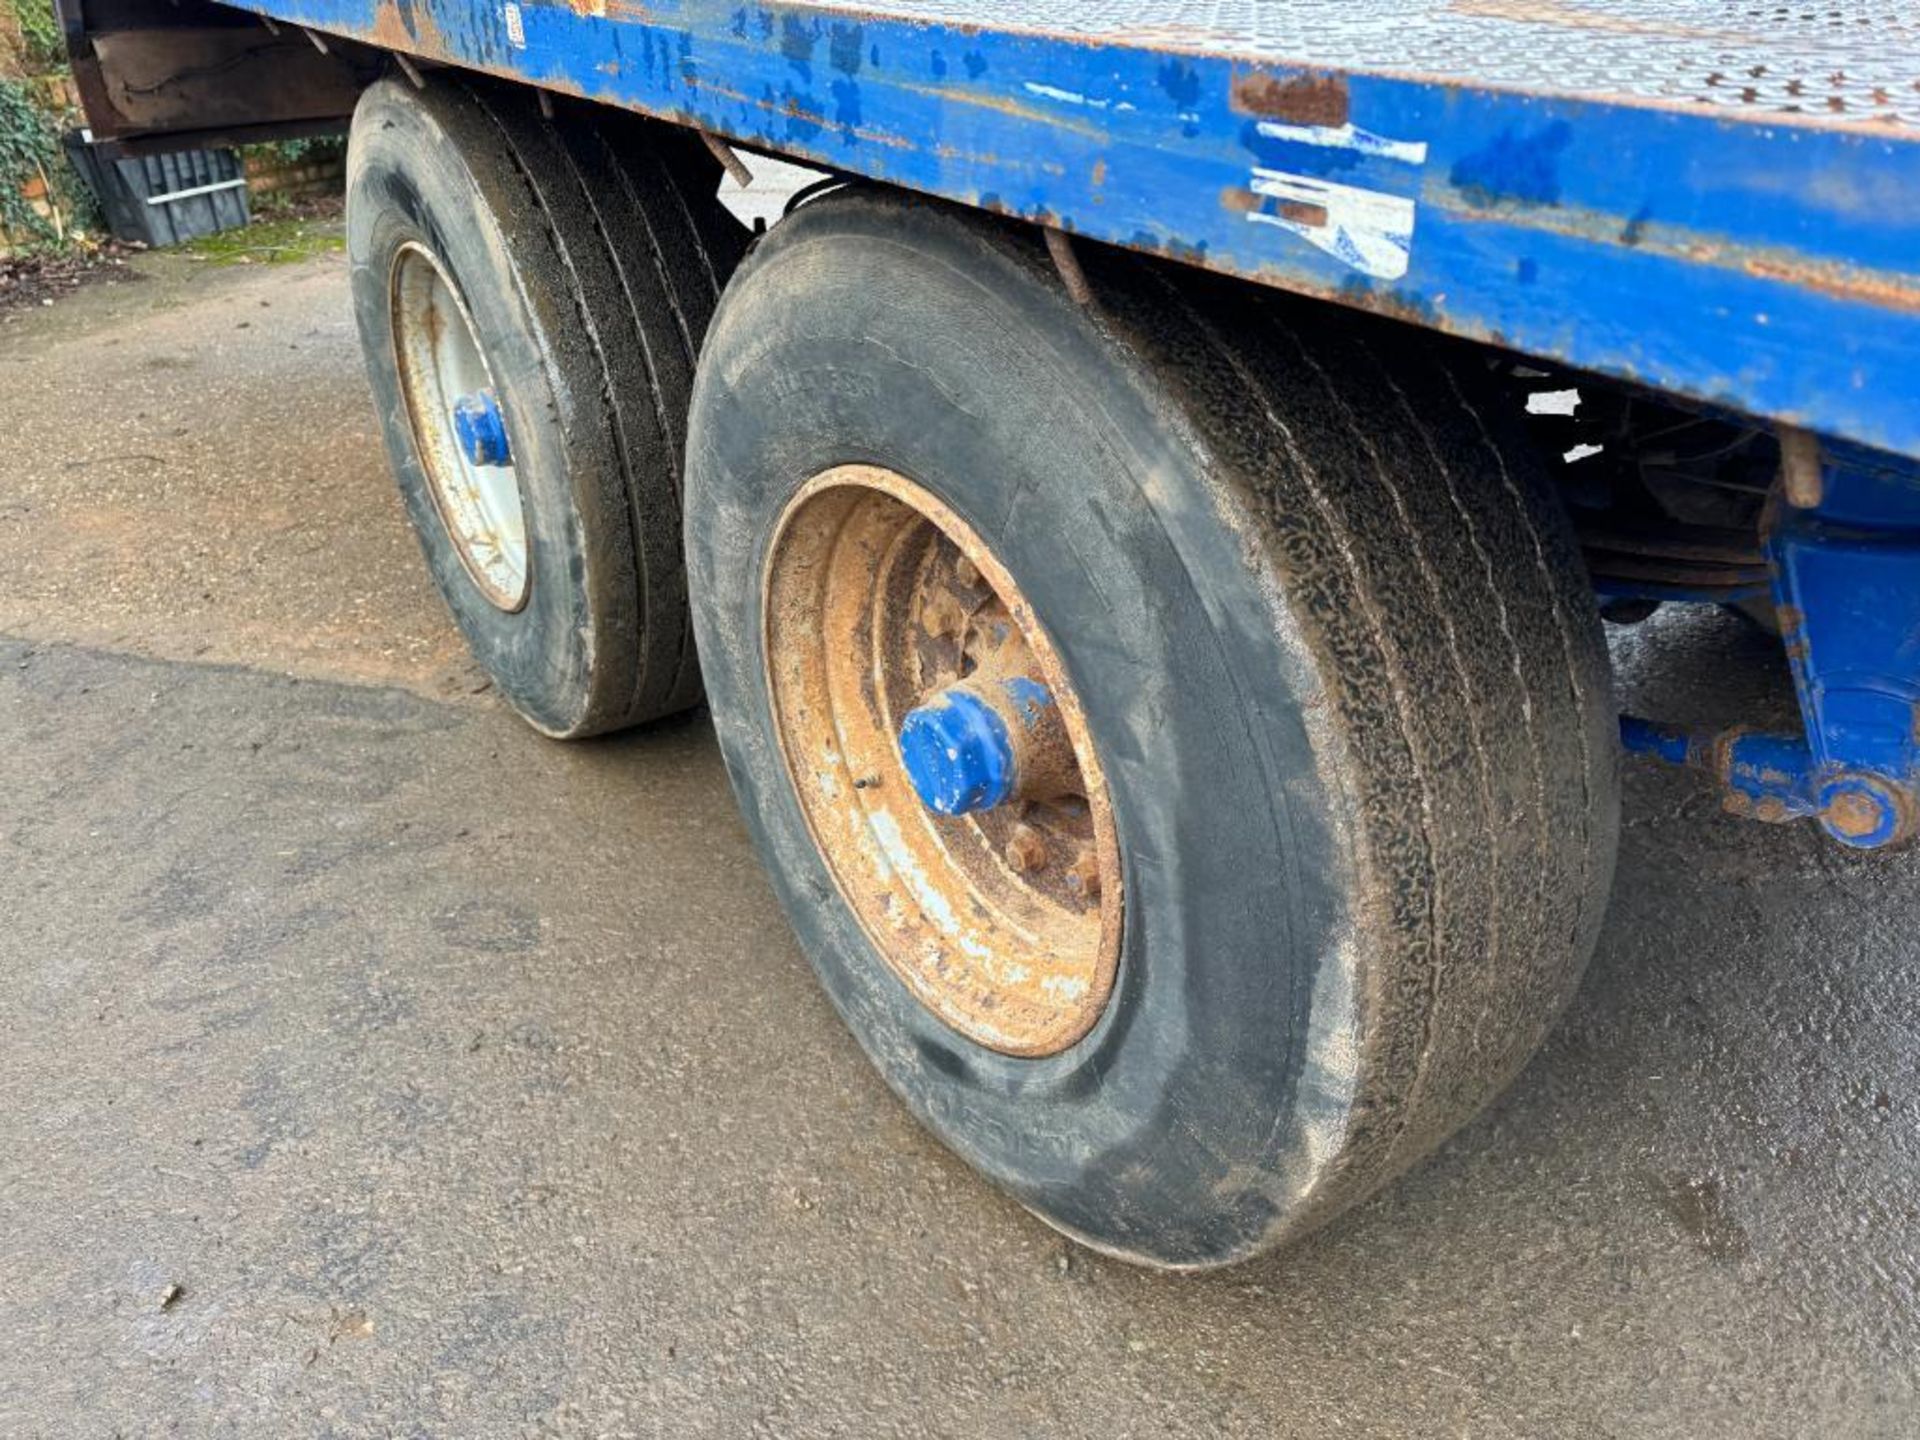 Philip Watkins 32ft twin axle flat bed trailer with metal floor, front bale rave, sprung drawbar and - Image 2 of 11